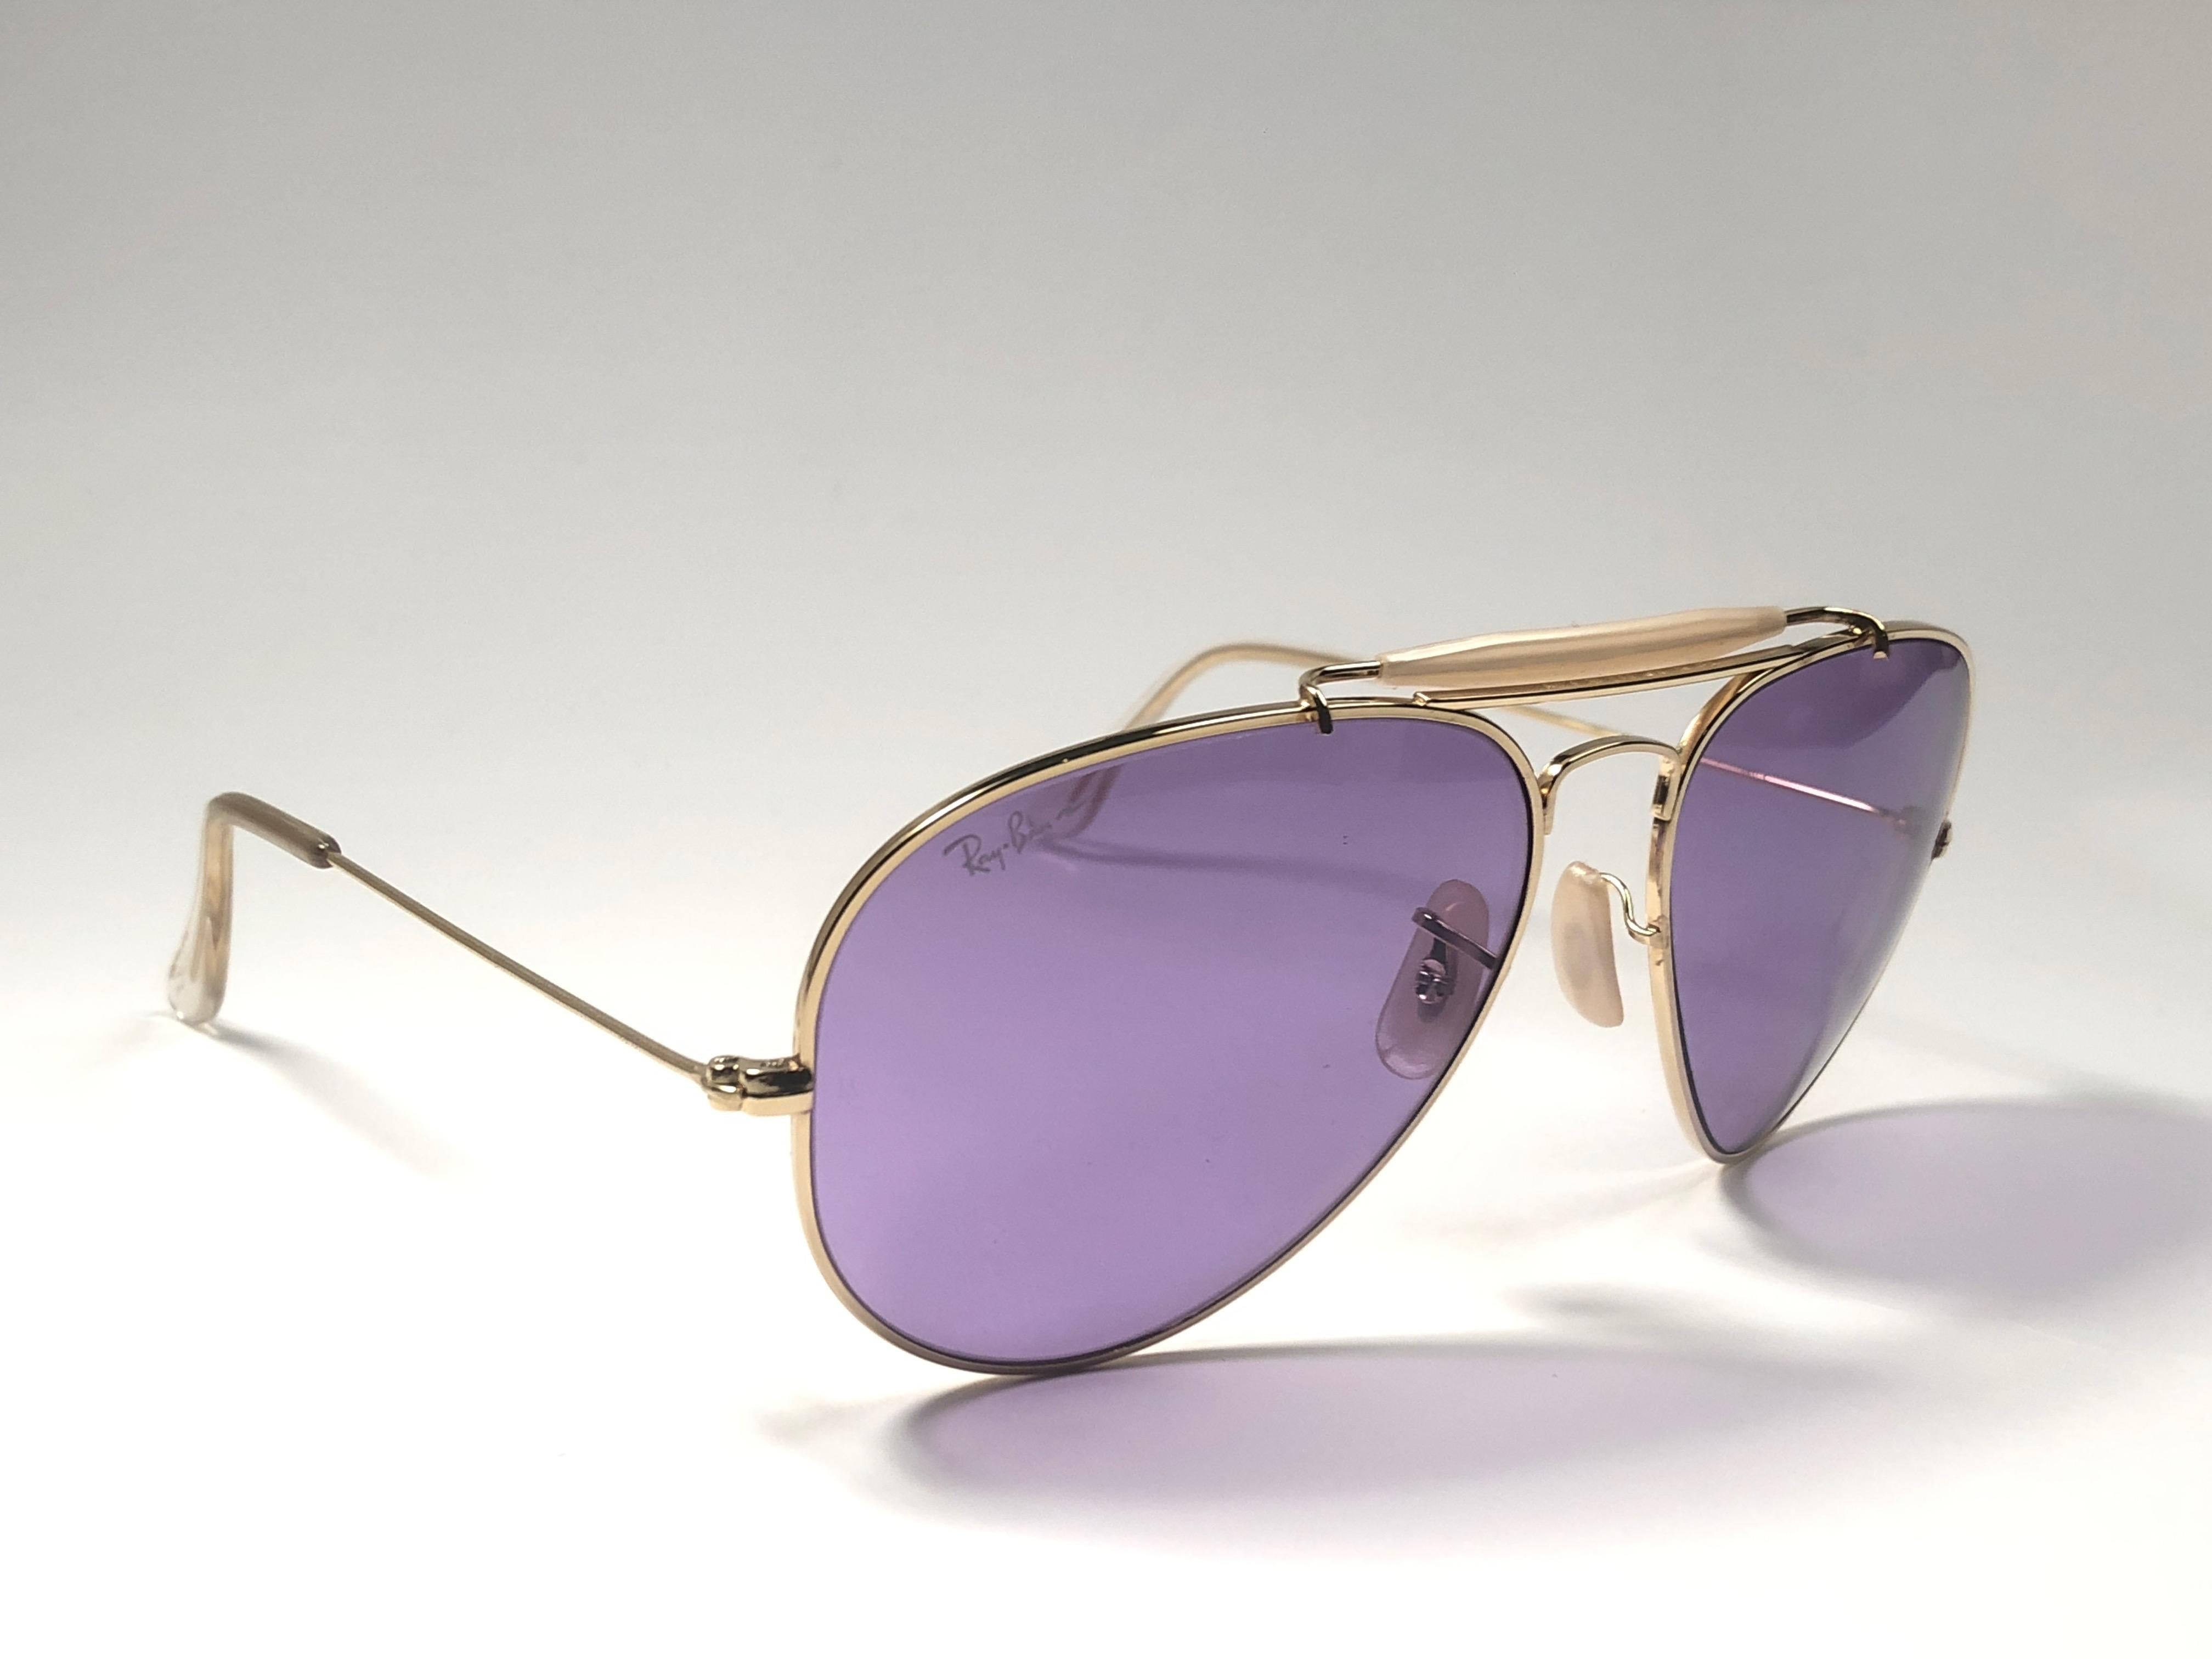 New, rare and sought after Vintage Ray Ban Purple Chromax. 
62Mm outdoorsman gold frame holding a pair of purple Chromax B&L etched lenses.

New, never worn or displayed, this item is a superb find.
This item have minor sign of wear due to storage